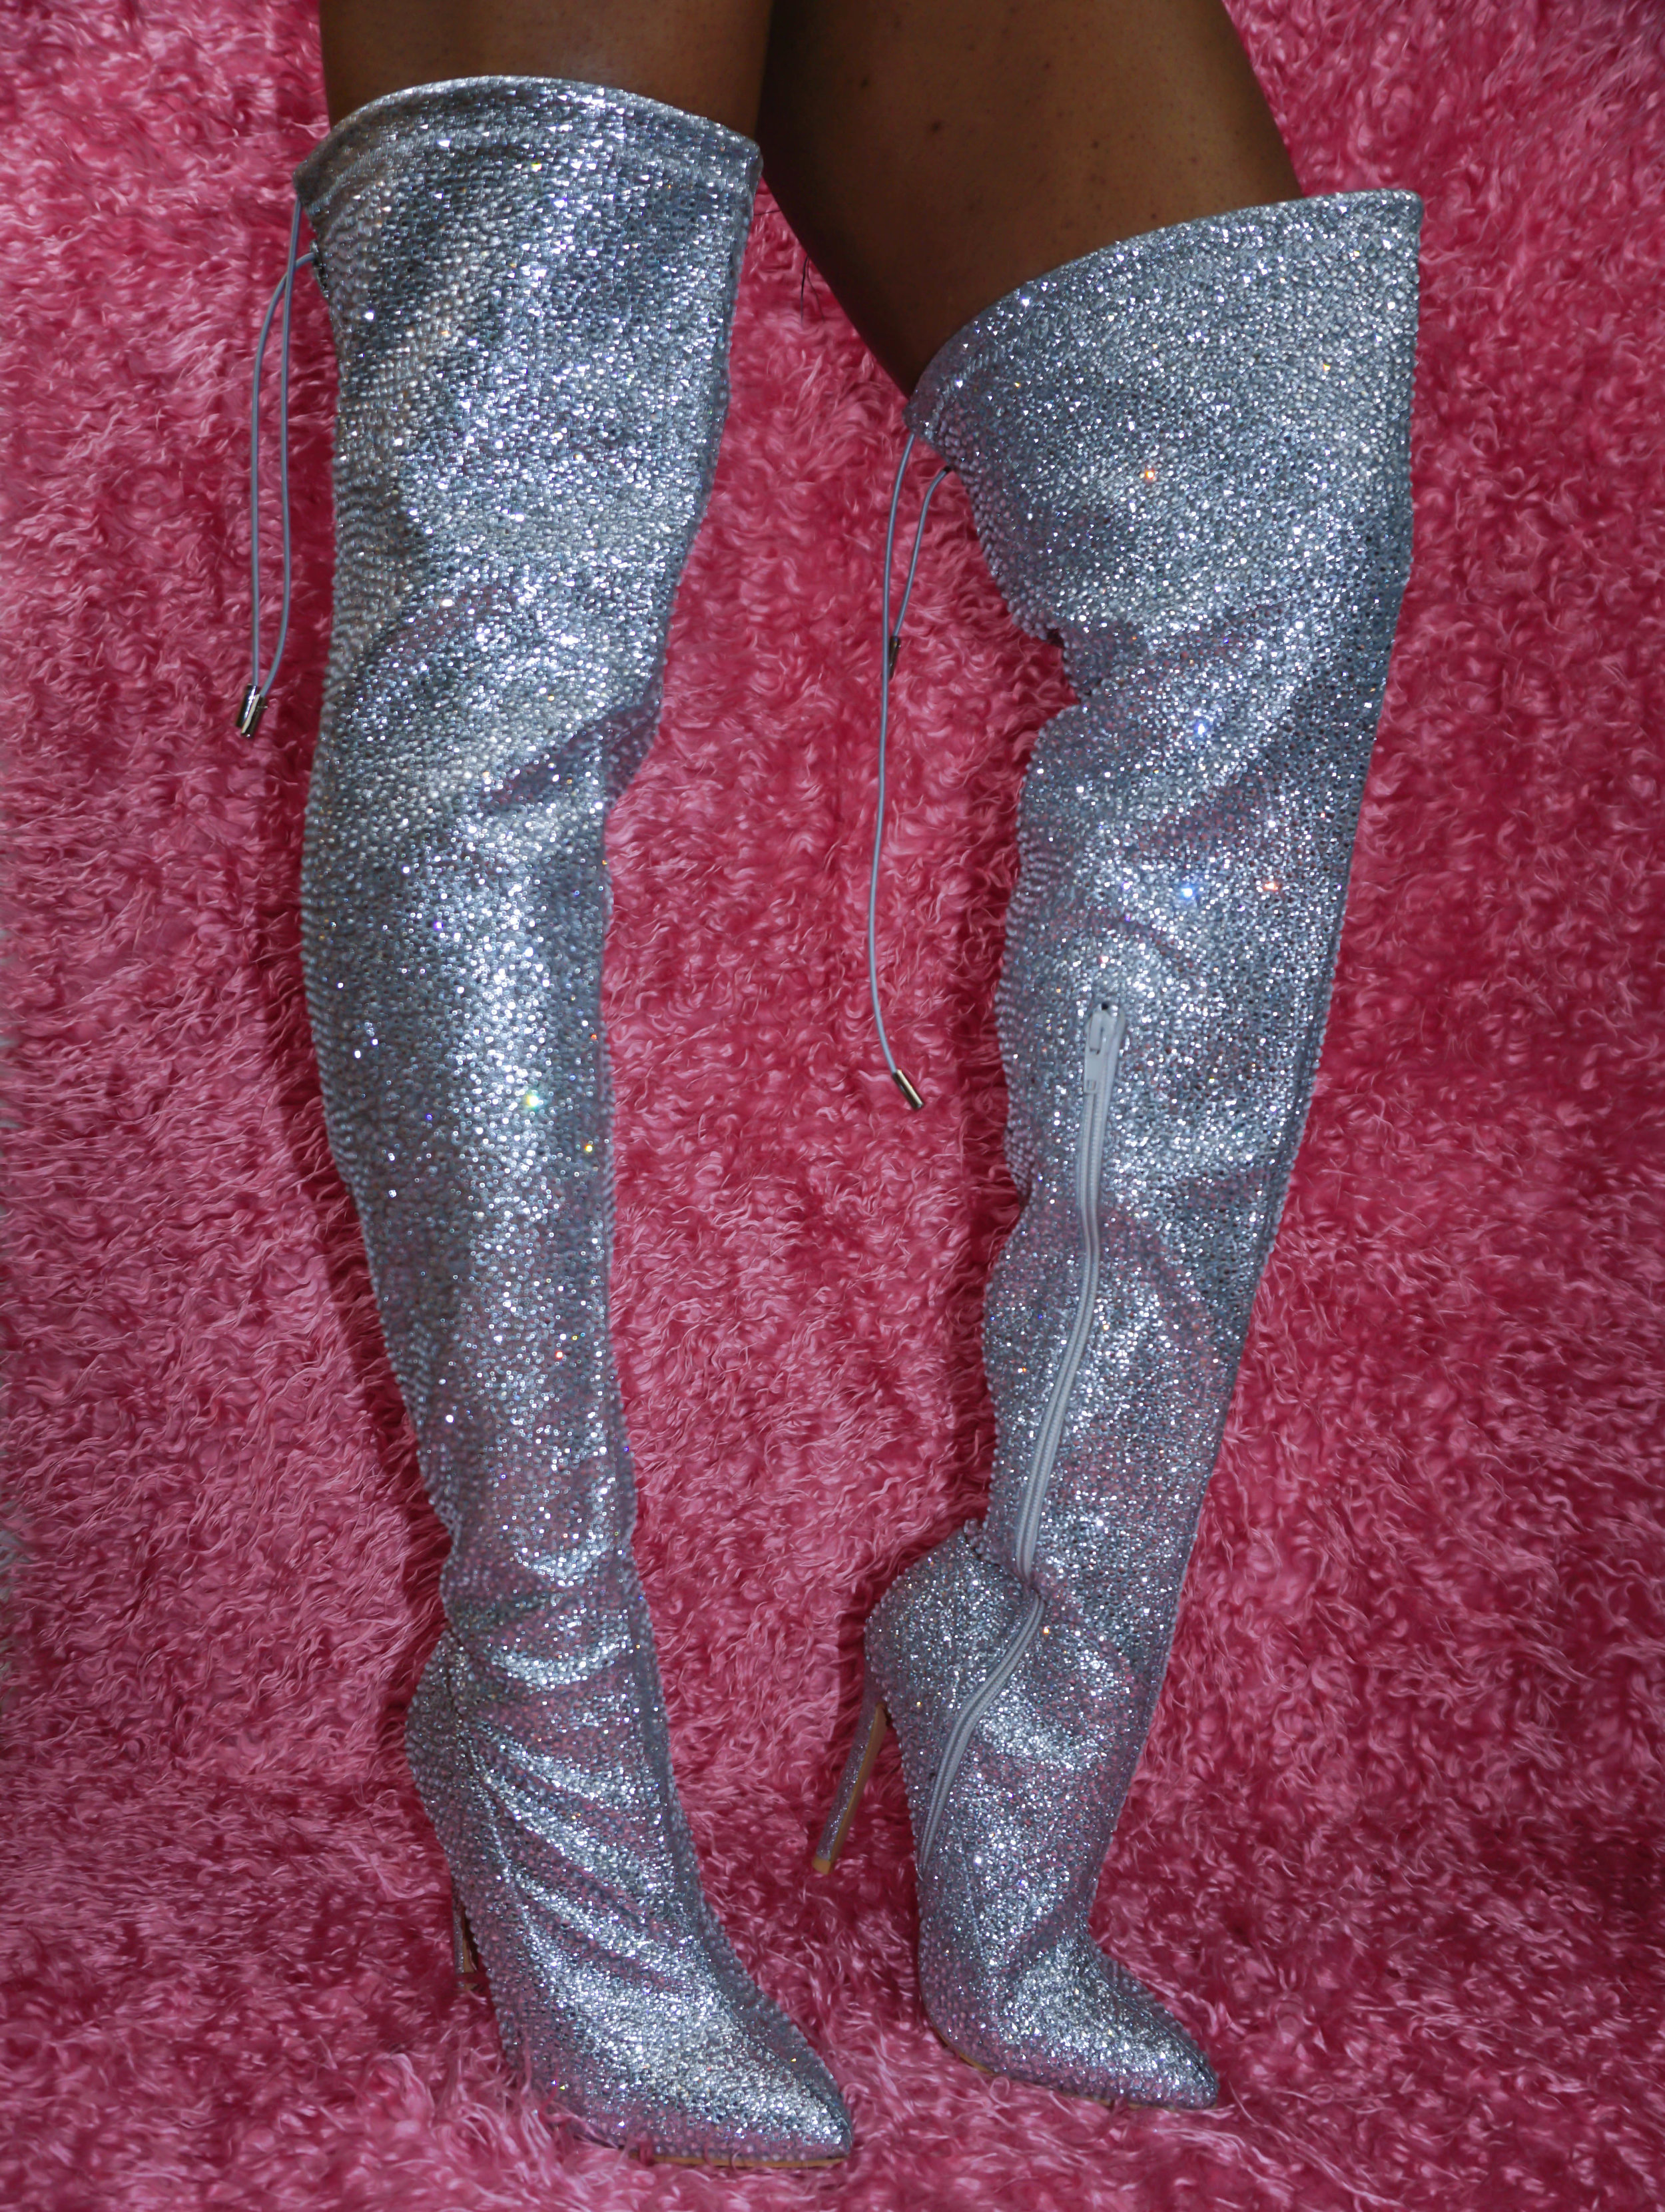 sparkly long boots